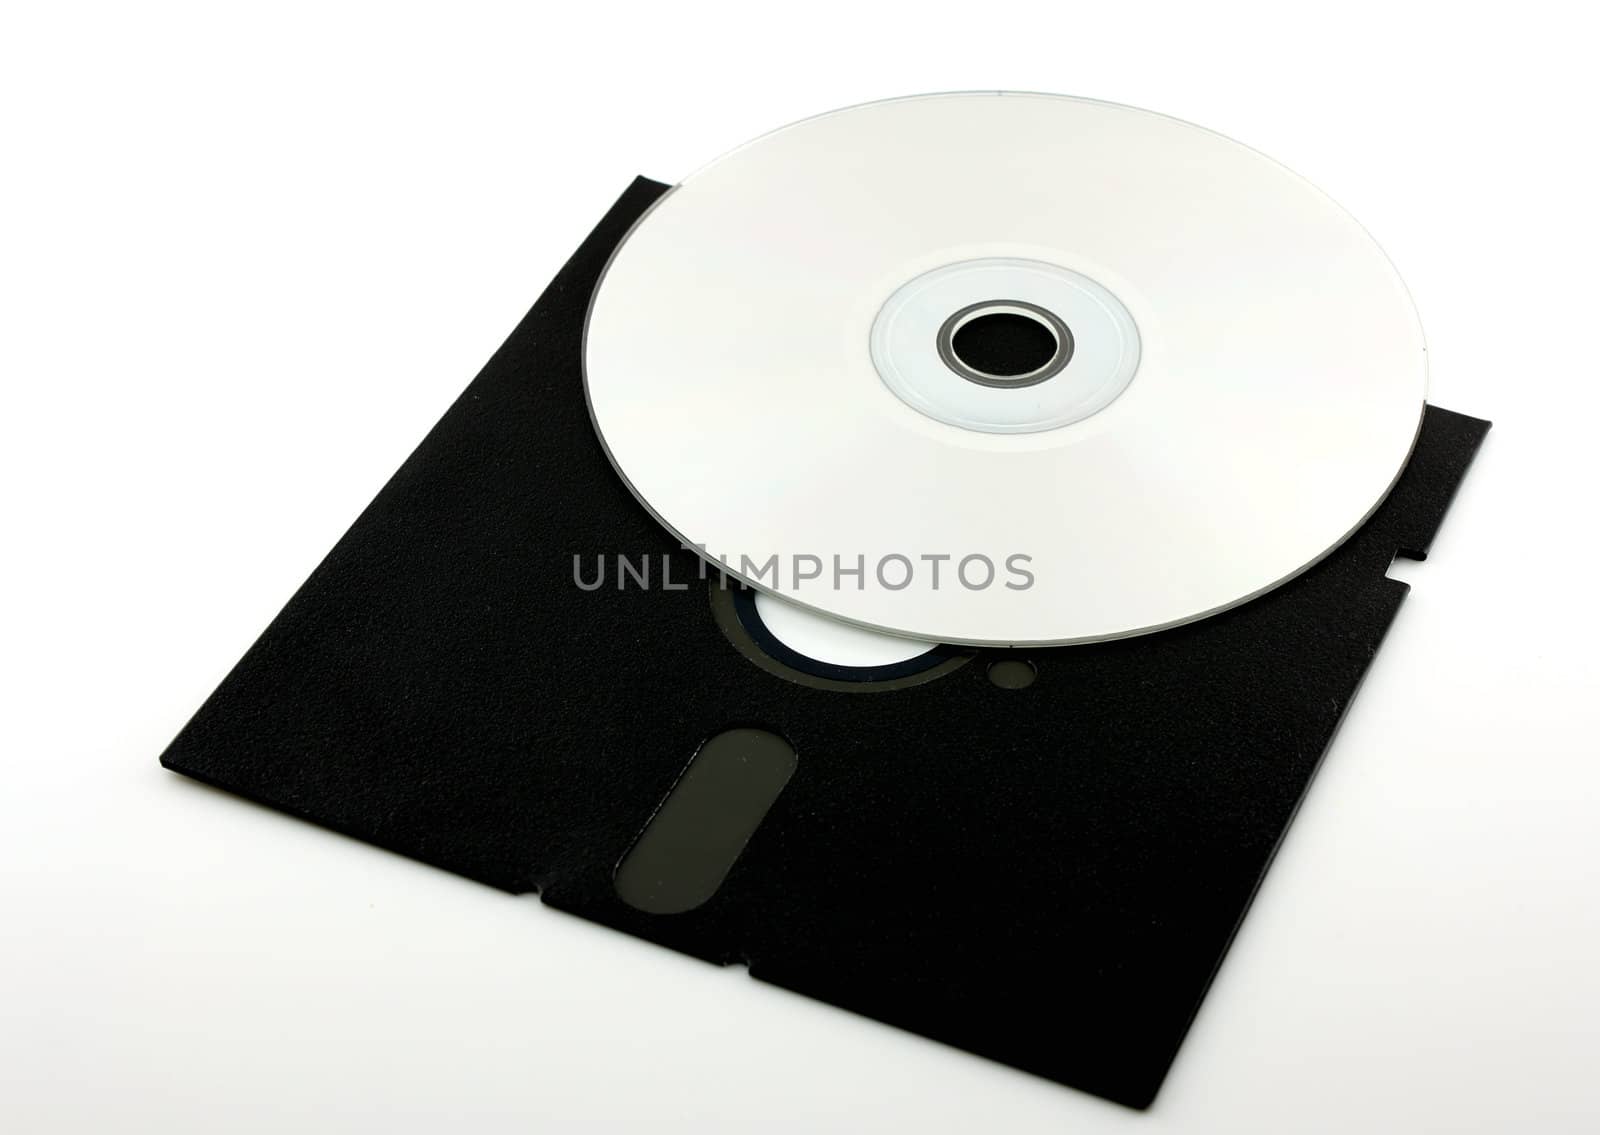 Old floppy disk and CD-ROM by sergpet